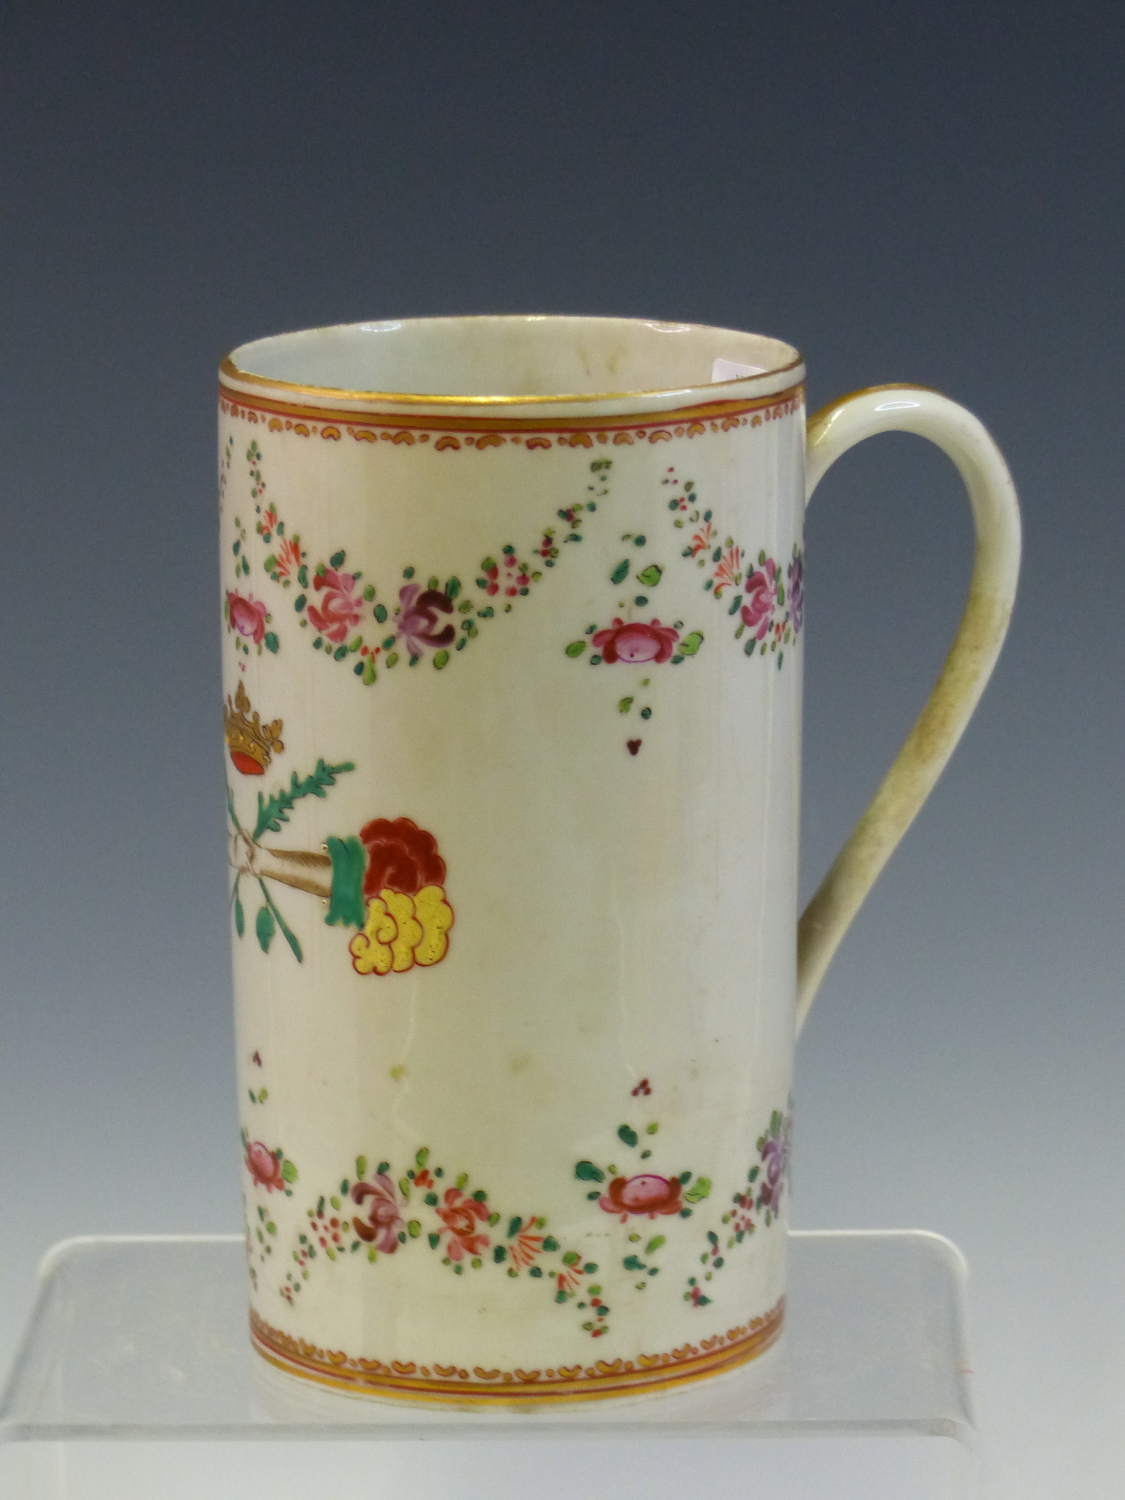 A LATE 19th C. CHINESE EXPORT SSTYLE CYLINDRICAL MUG, THE SWAGS OF FLOWERS ABOVE AND BELOW THE